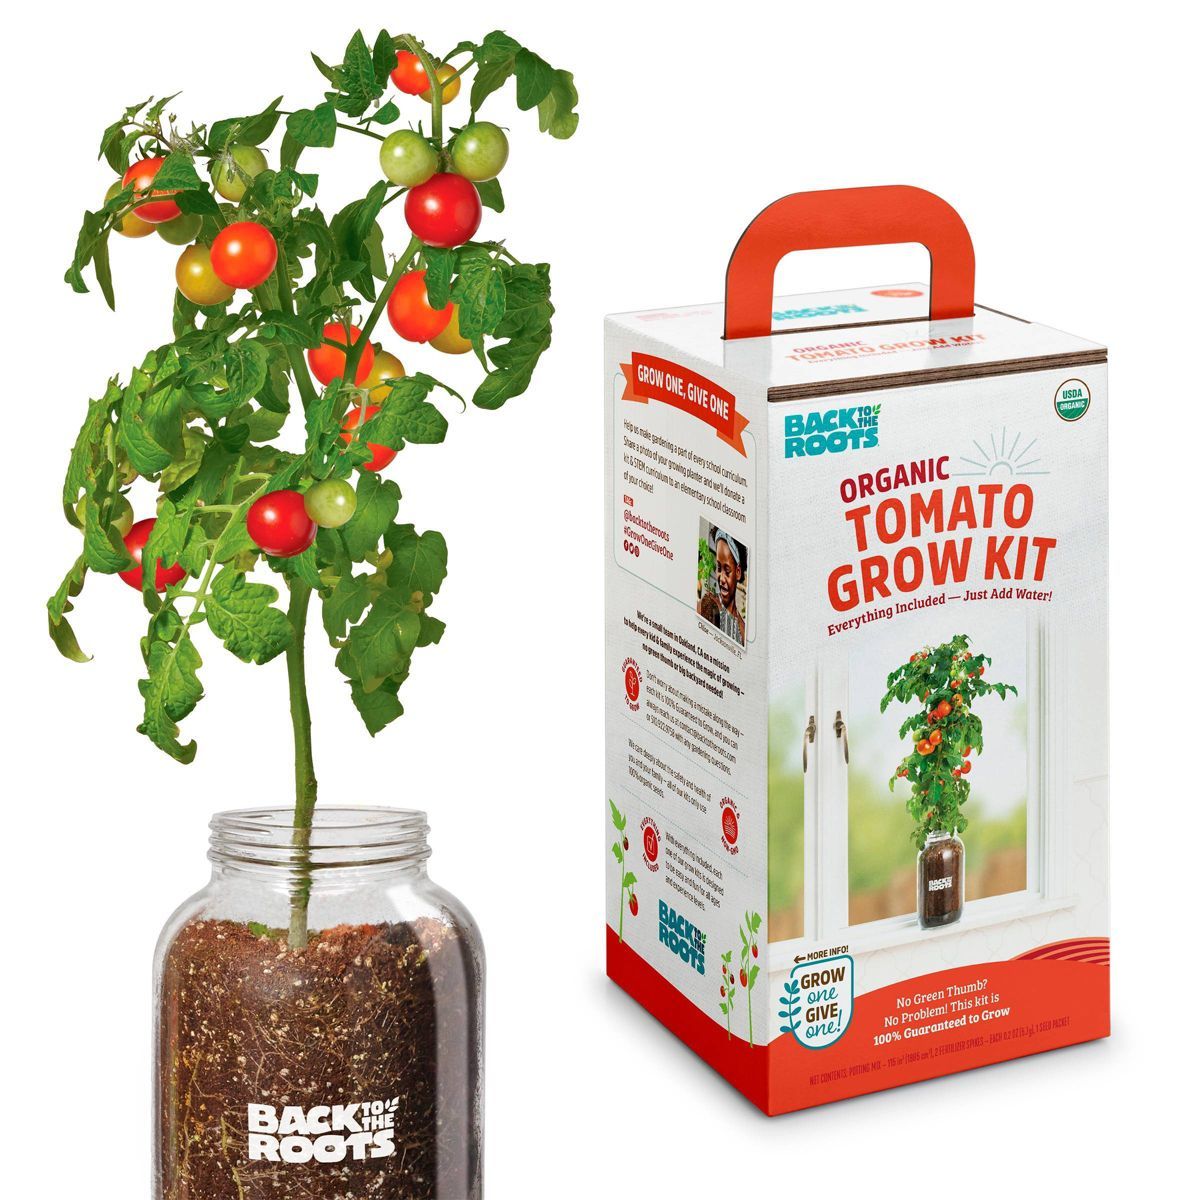 Back to the Roots Organic Tomato Grow Kit | Target